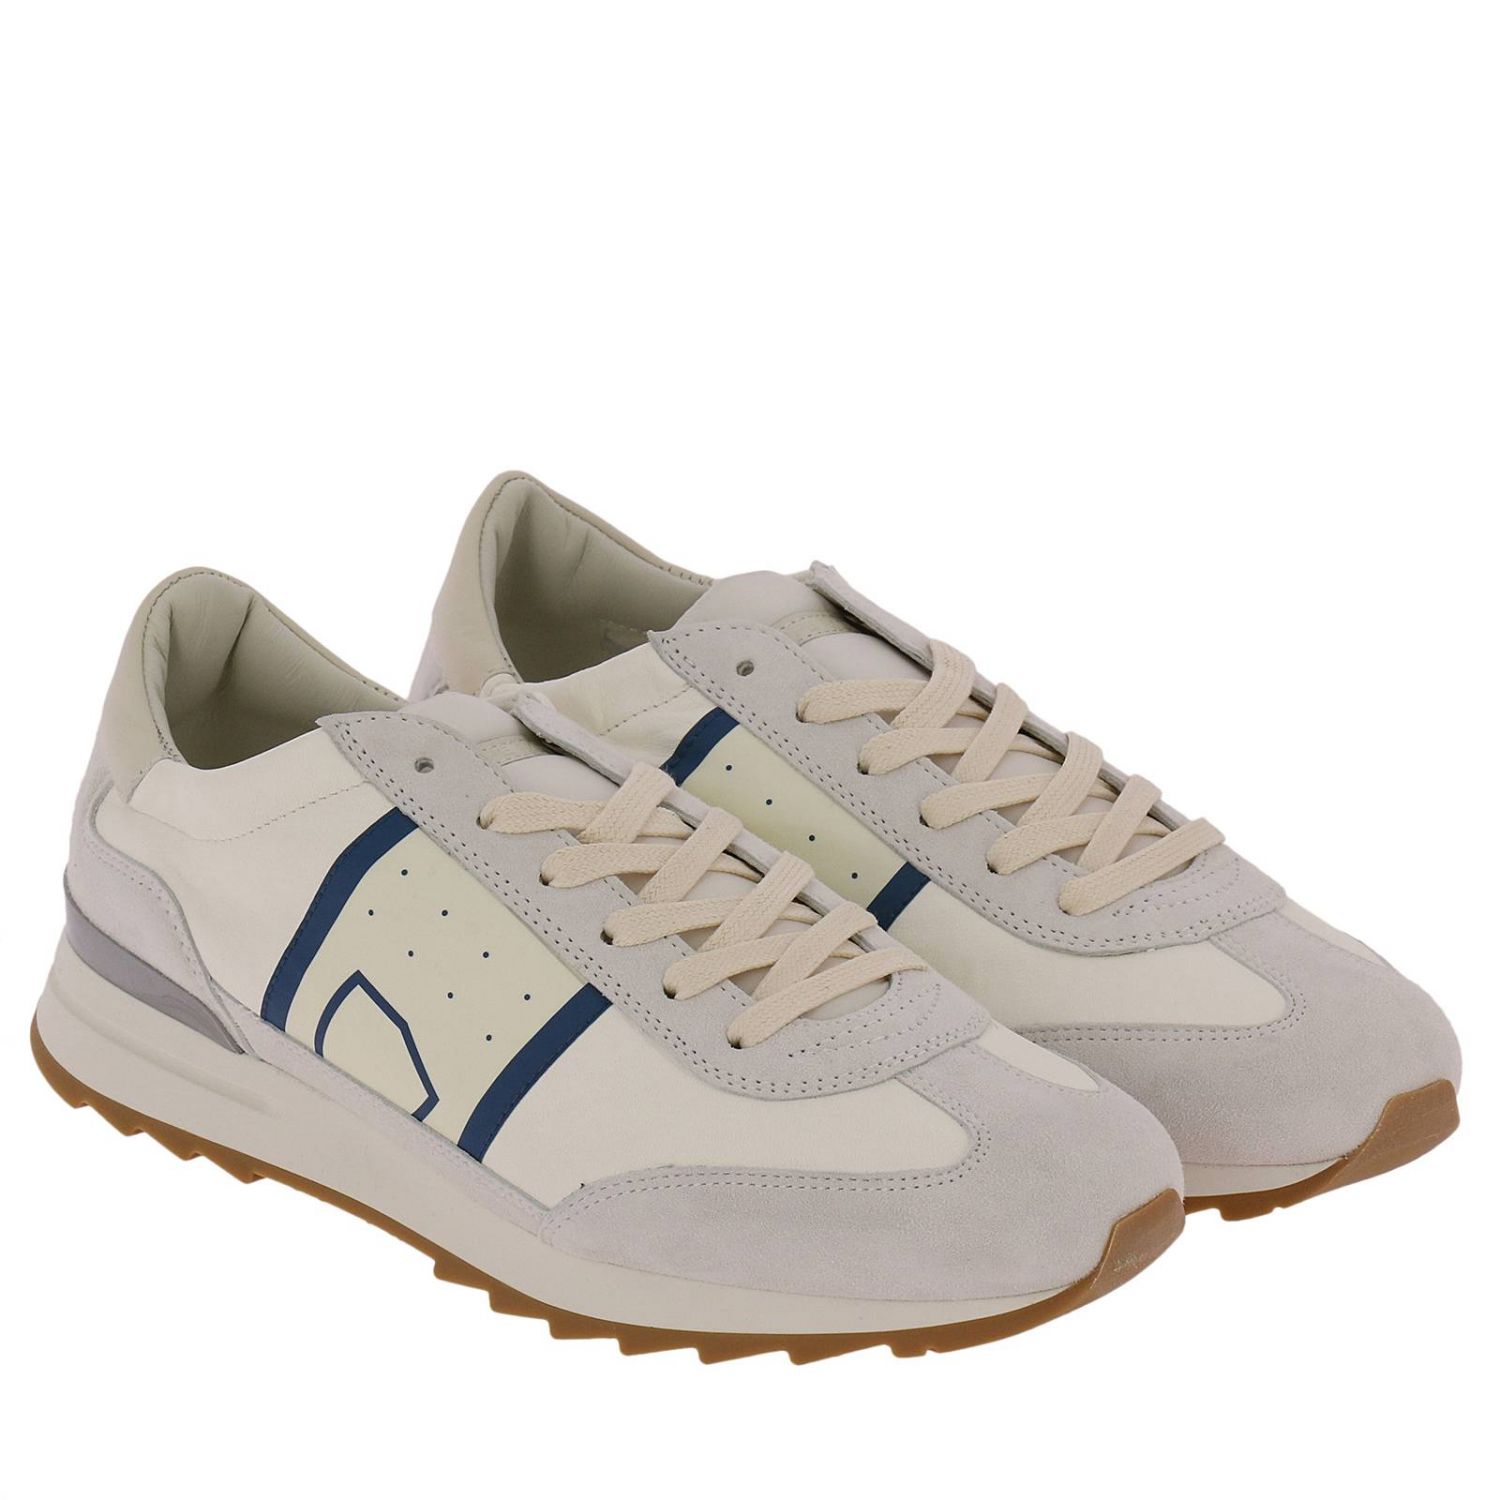 Philippe Model Outlet: Shoes men | Sneakers Philippe Model Men White ...